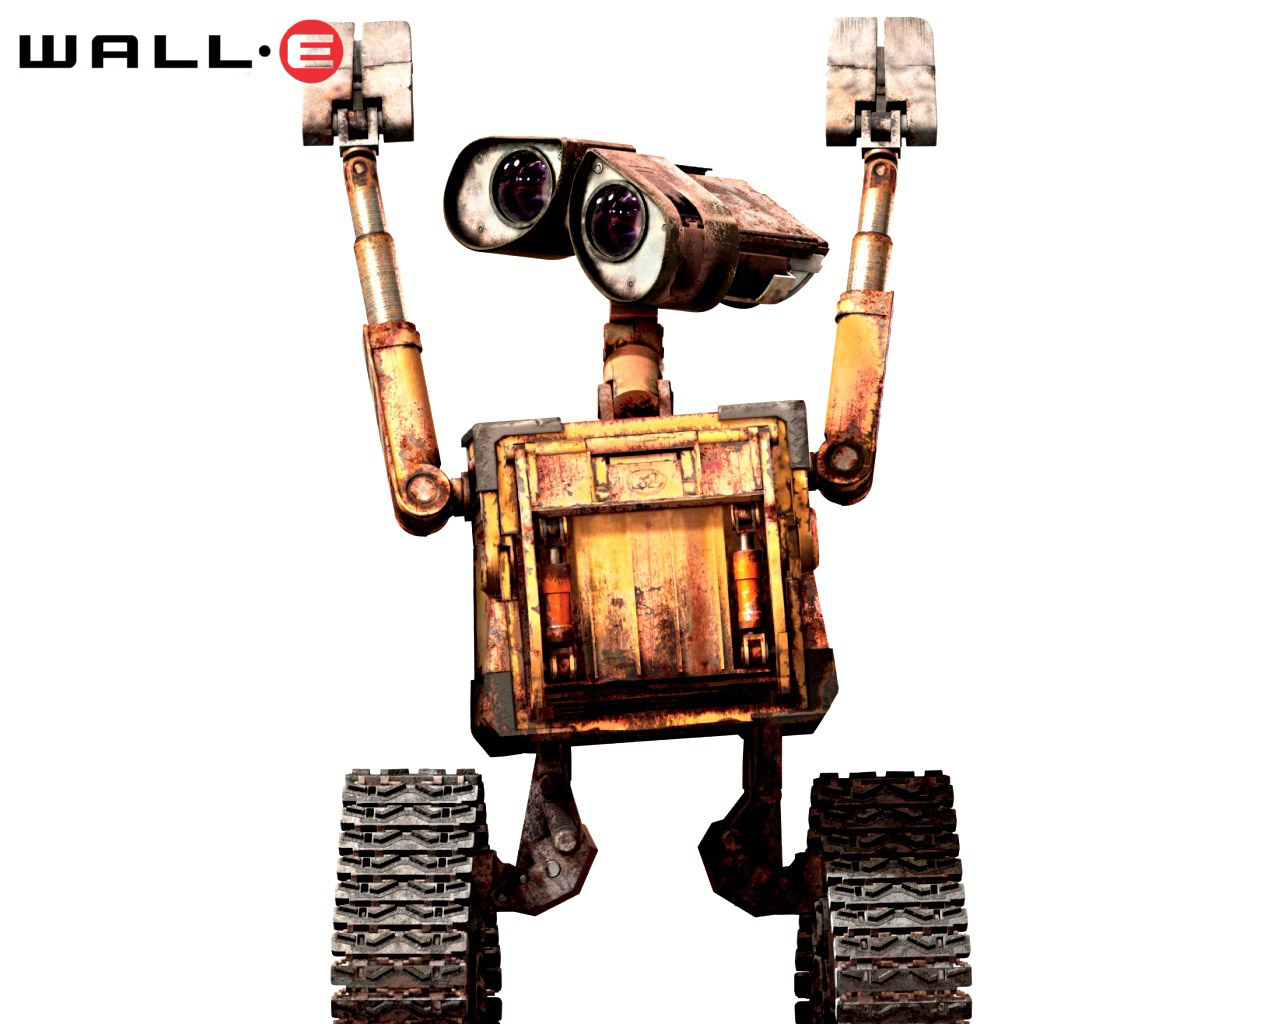 WALLE  HD Wallpapers High Definition  iPhone HD Wallpapers 